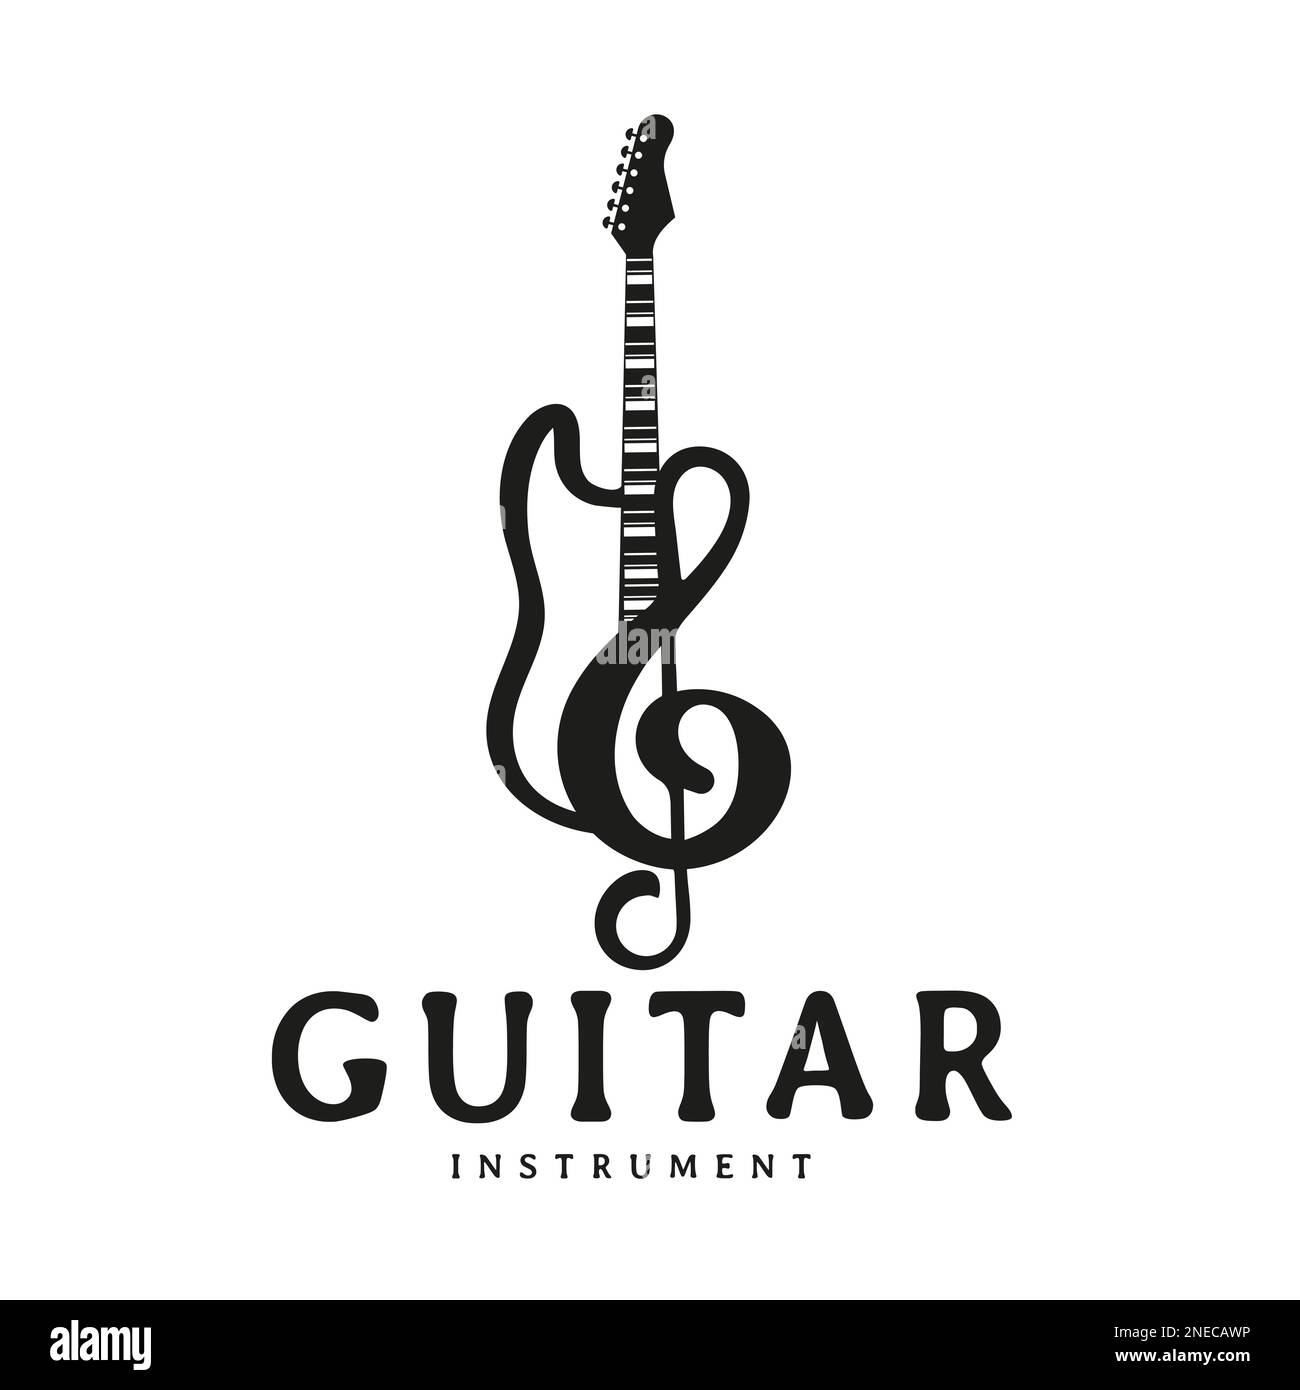 Instrumental guitar modern logo design inspiration and can be used for musical instrument shop Stock Vector